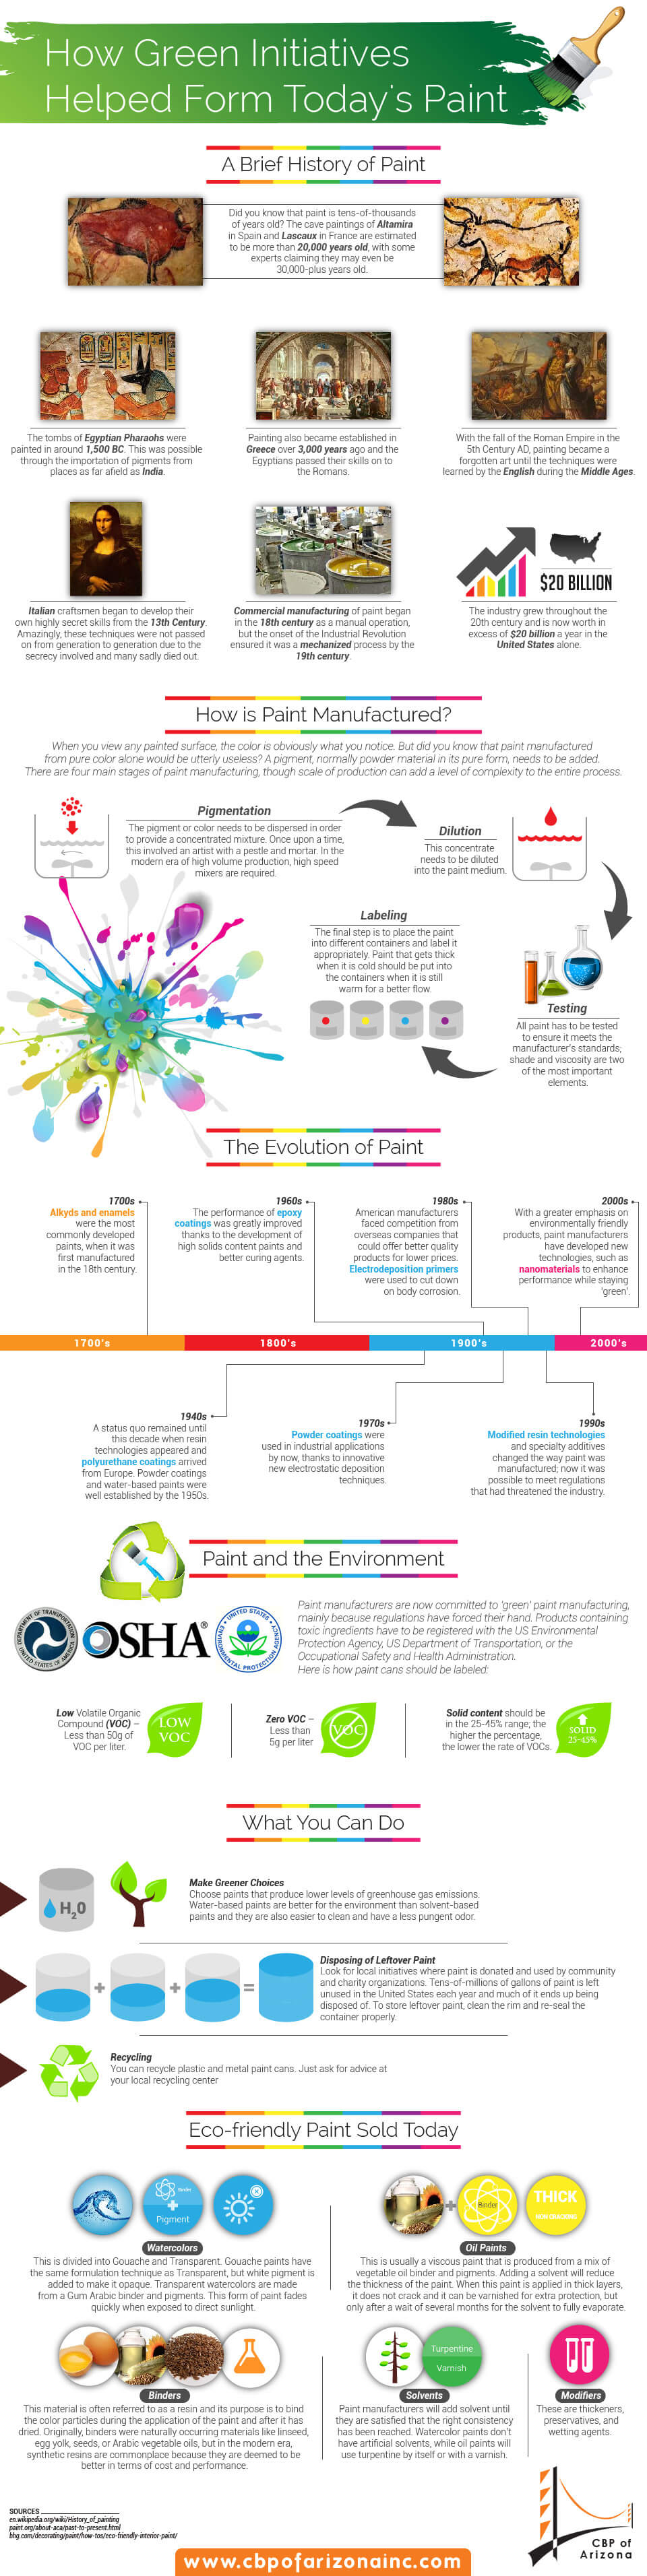 how-green-initiatives-helped-form-todays-paint-infographic